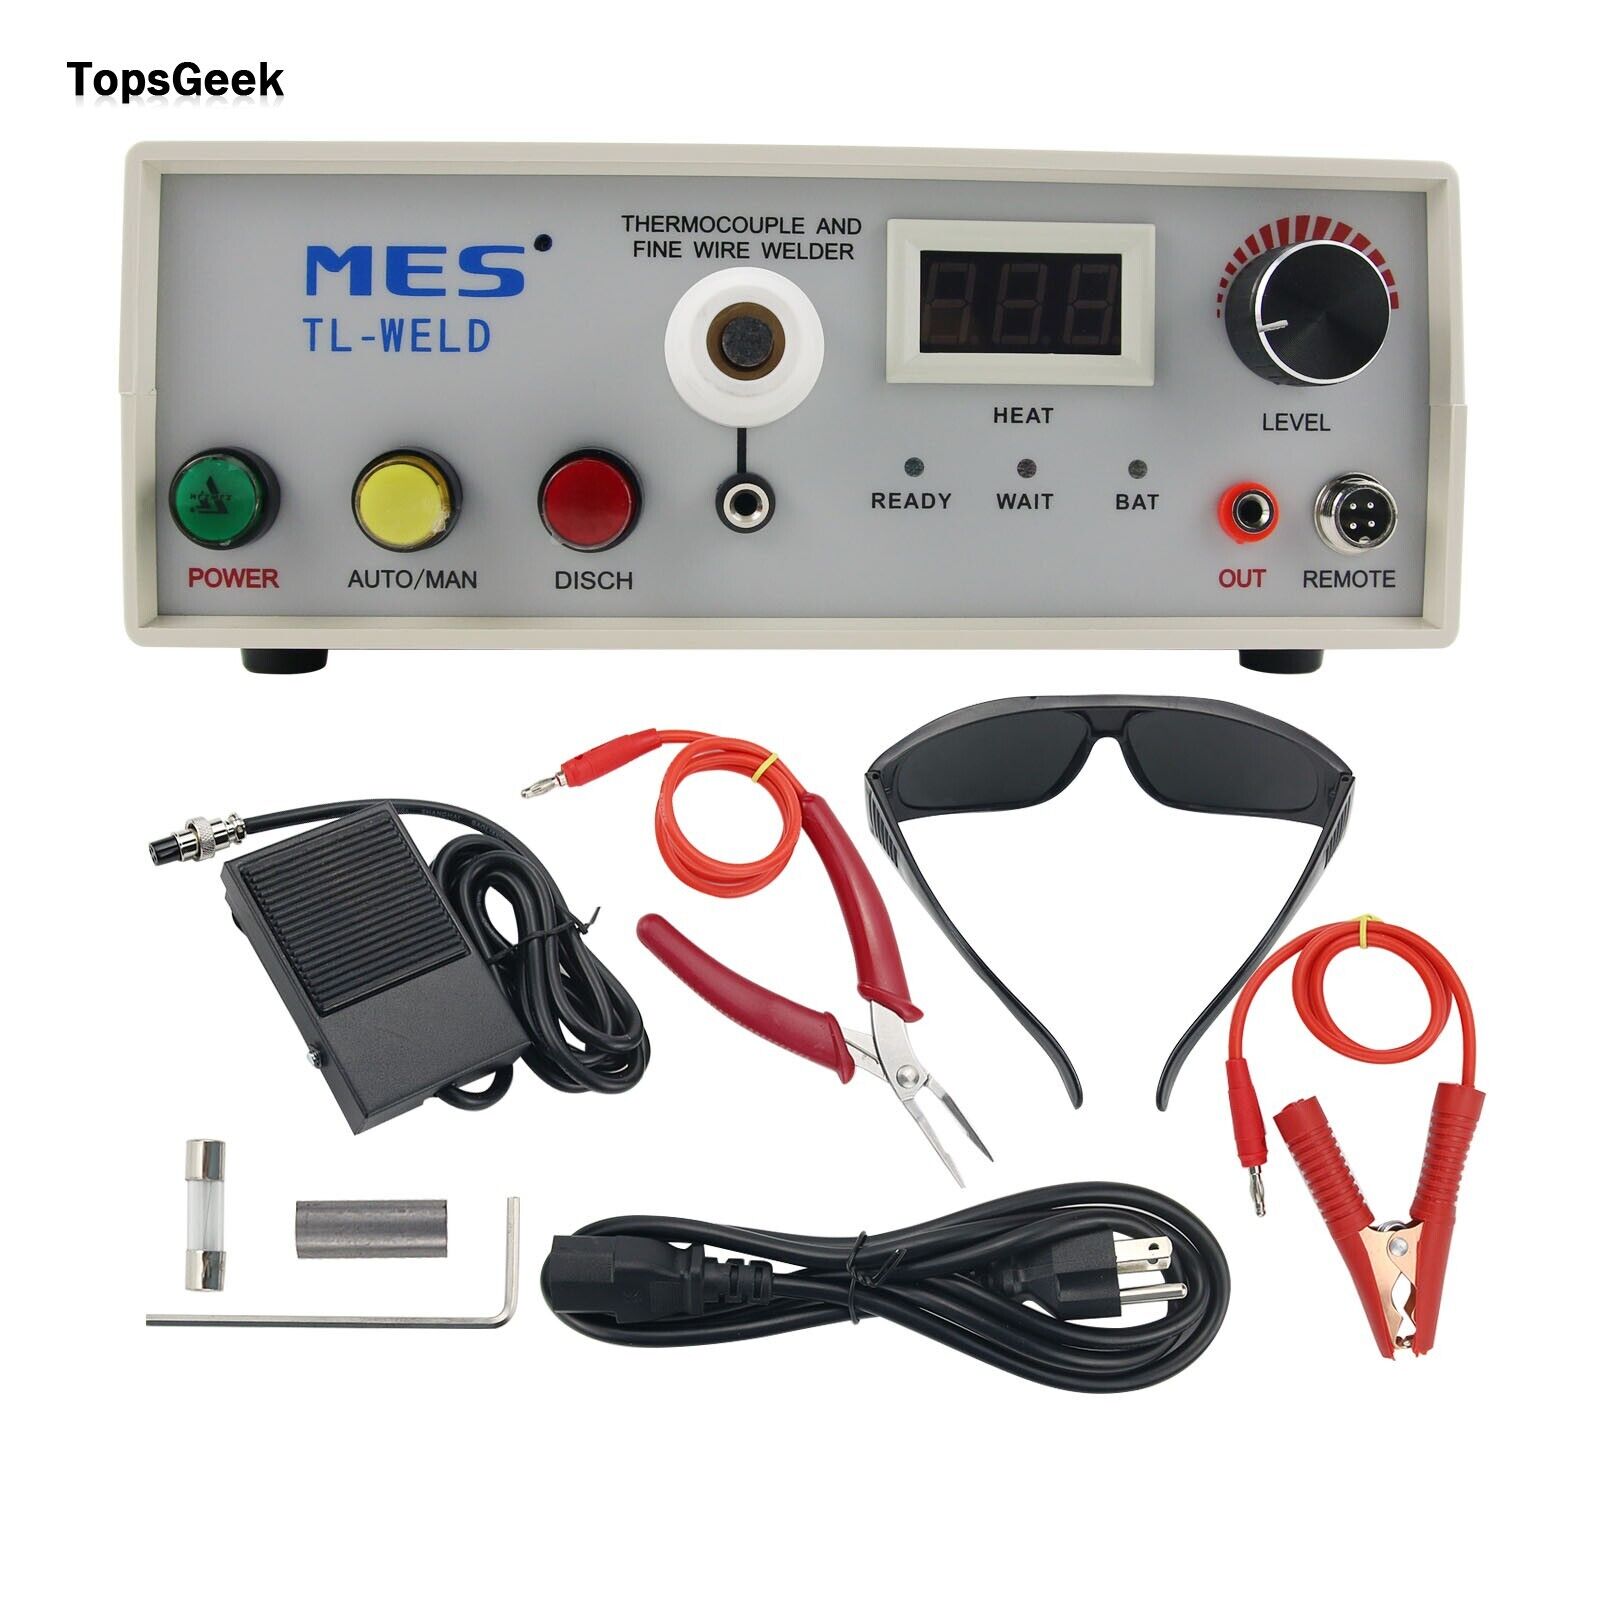 MES TL-WELD Thermocouple Butt Welding Machine for Welding Temperature Wire top